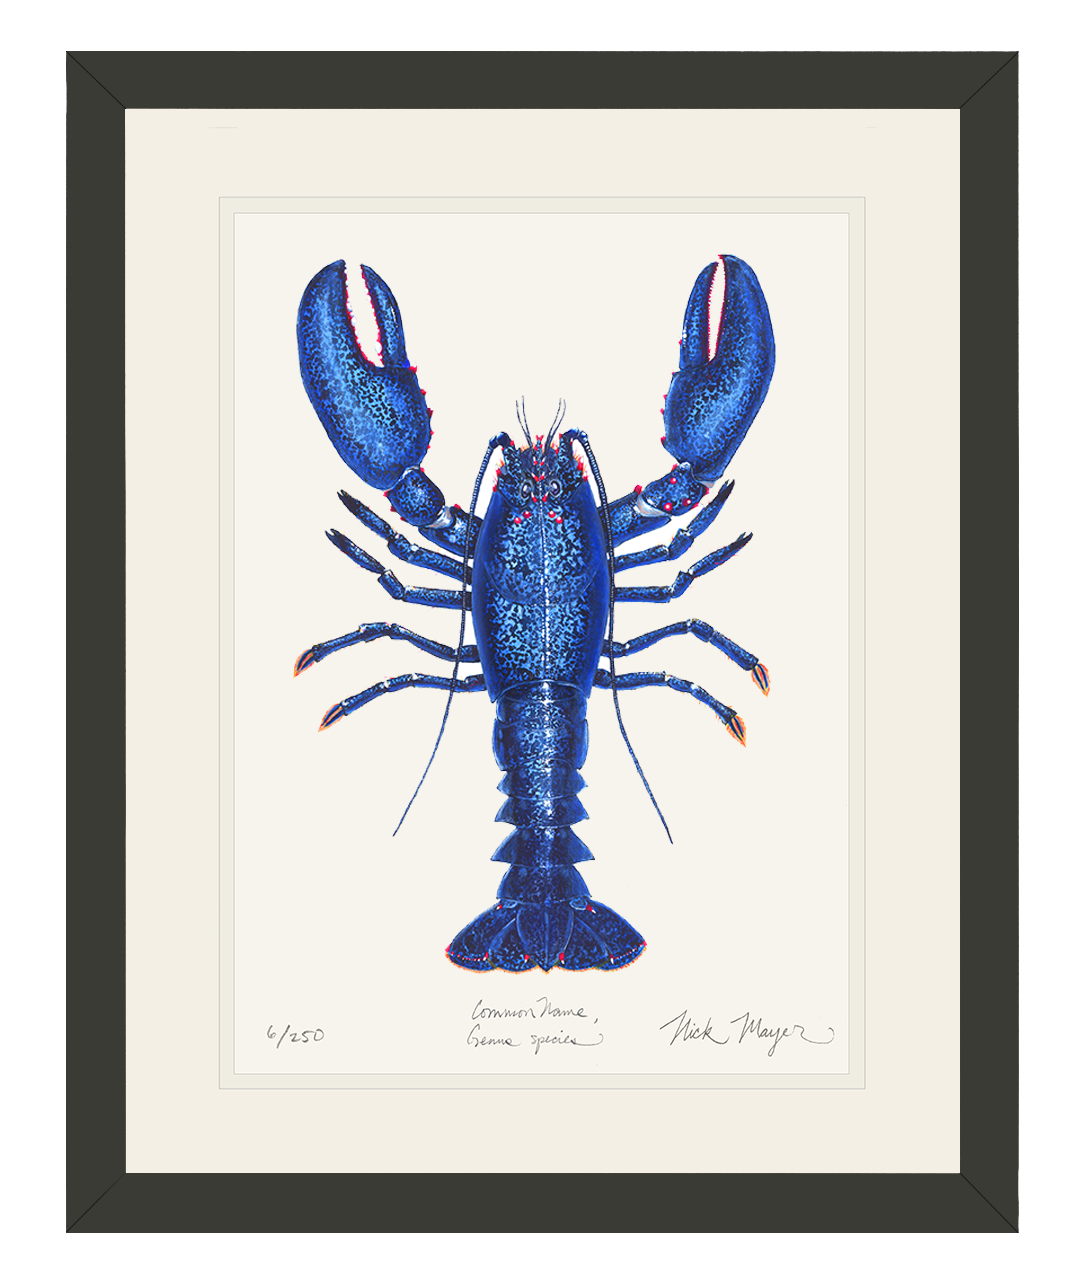 BLUE LOBSTER II: 18" x 24" FRAMED IN BLACK, 1 AVAILABLE, SHIPS MONDAY 12/18/23!